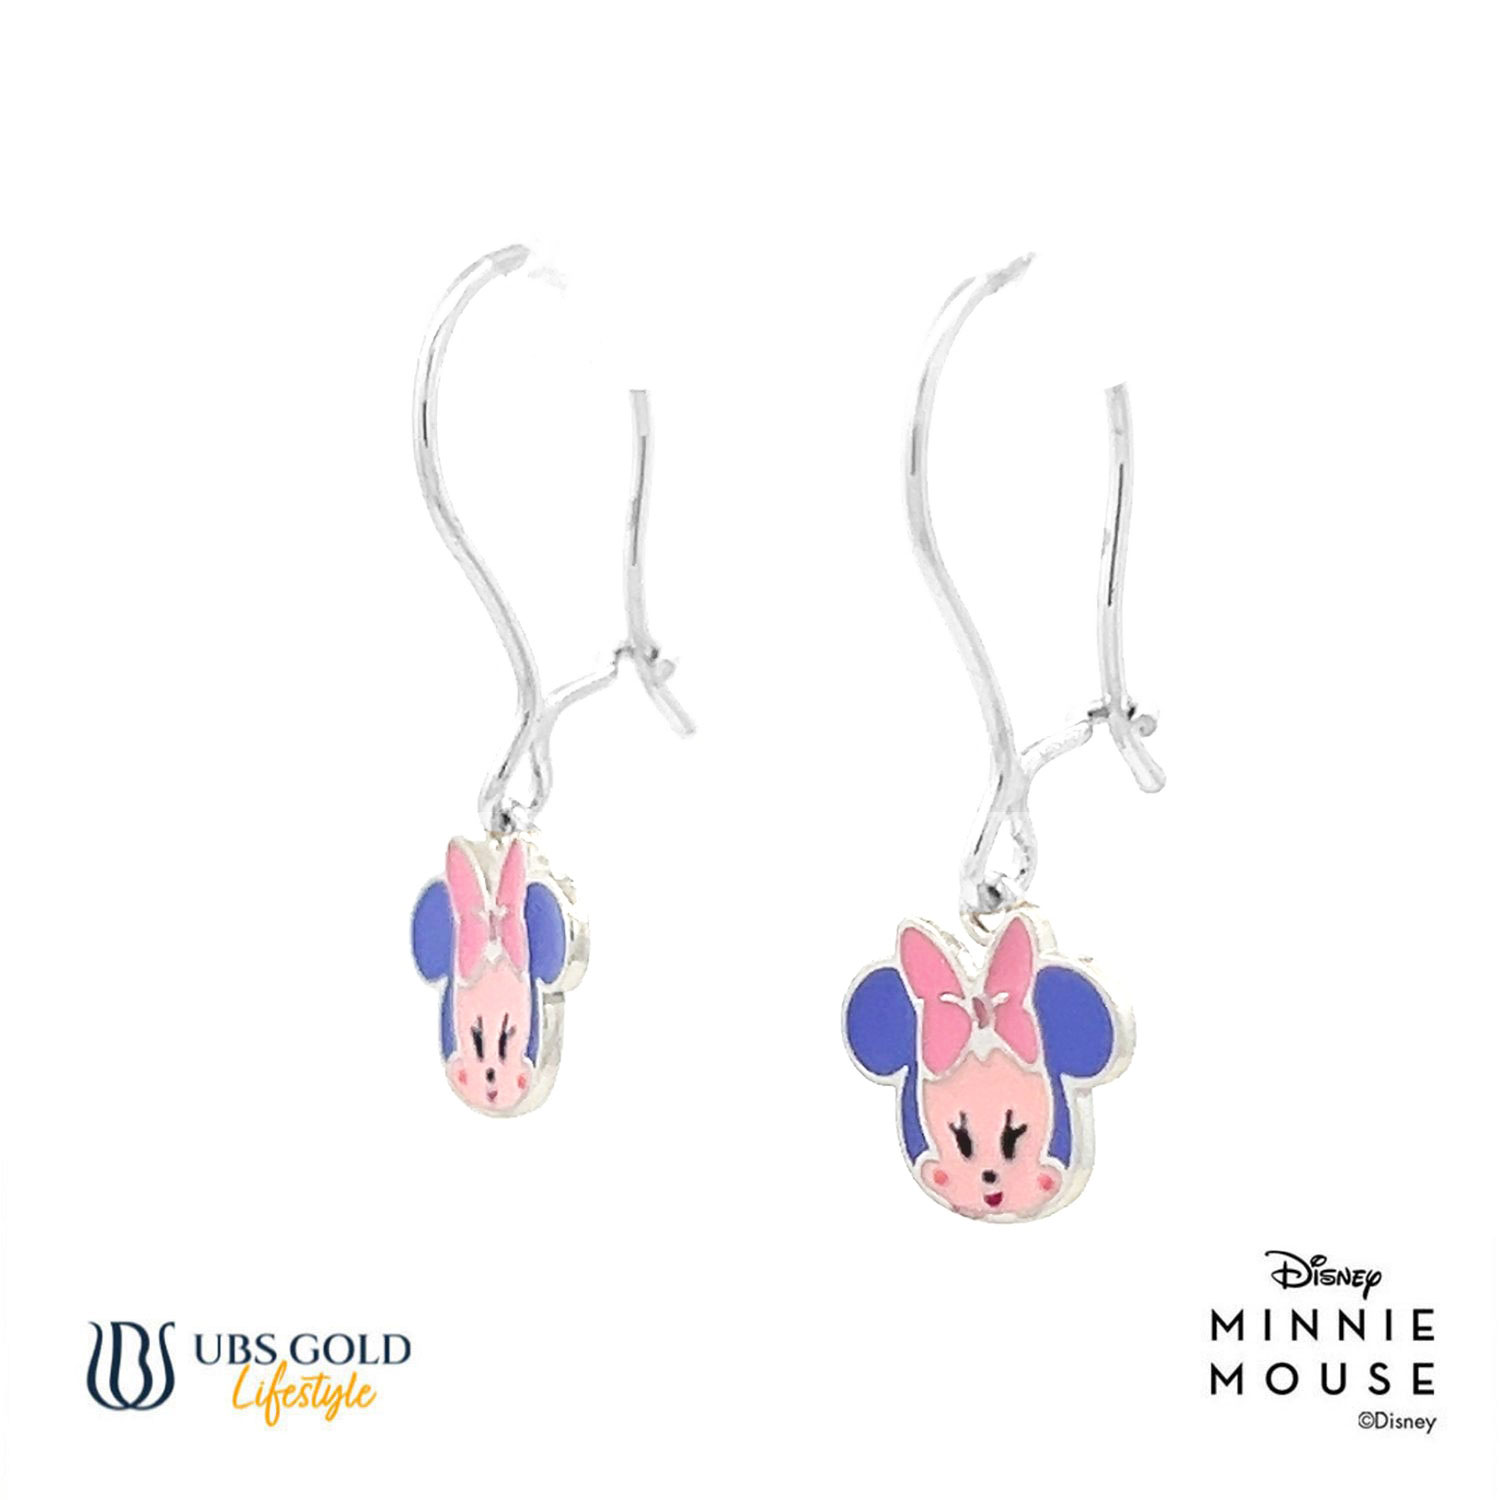 UBS Gold Anting Emas Anak Disney Minnie Mouse - Aay0099 - 17K